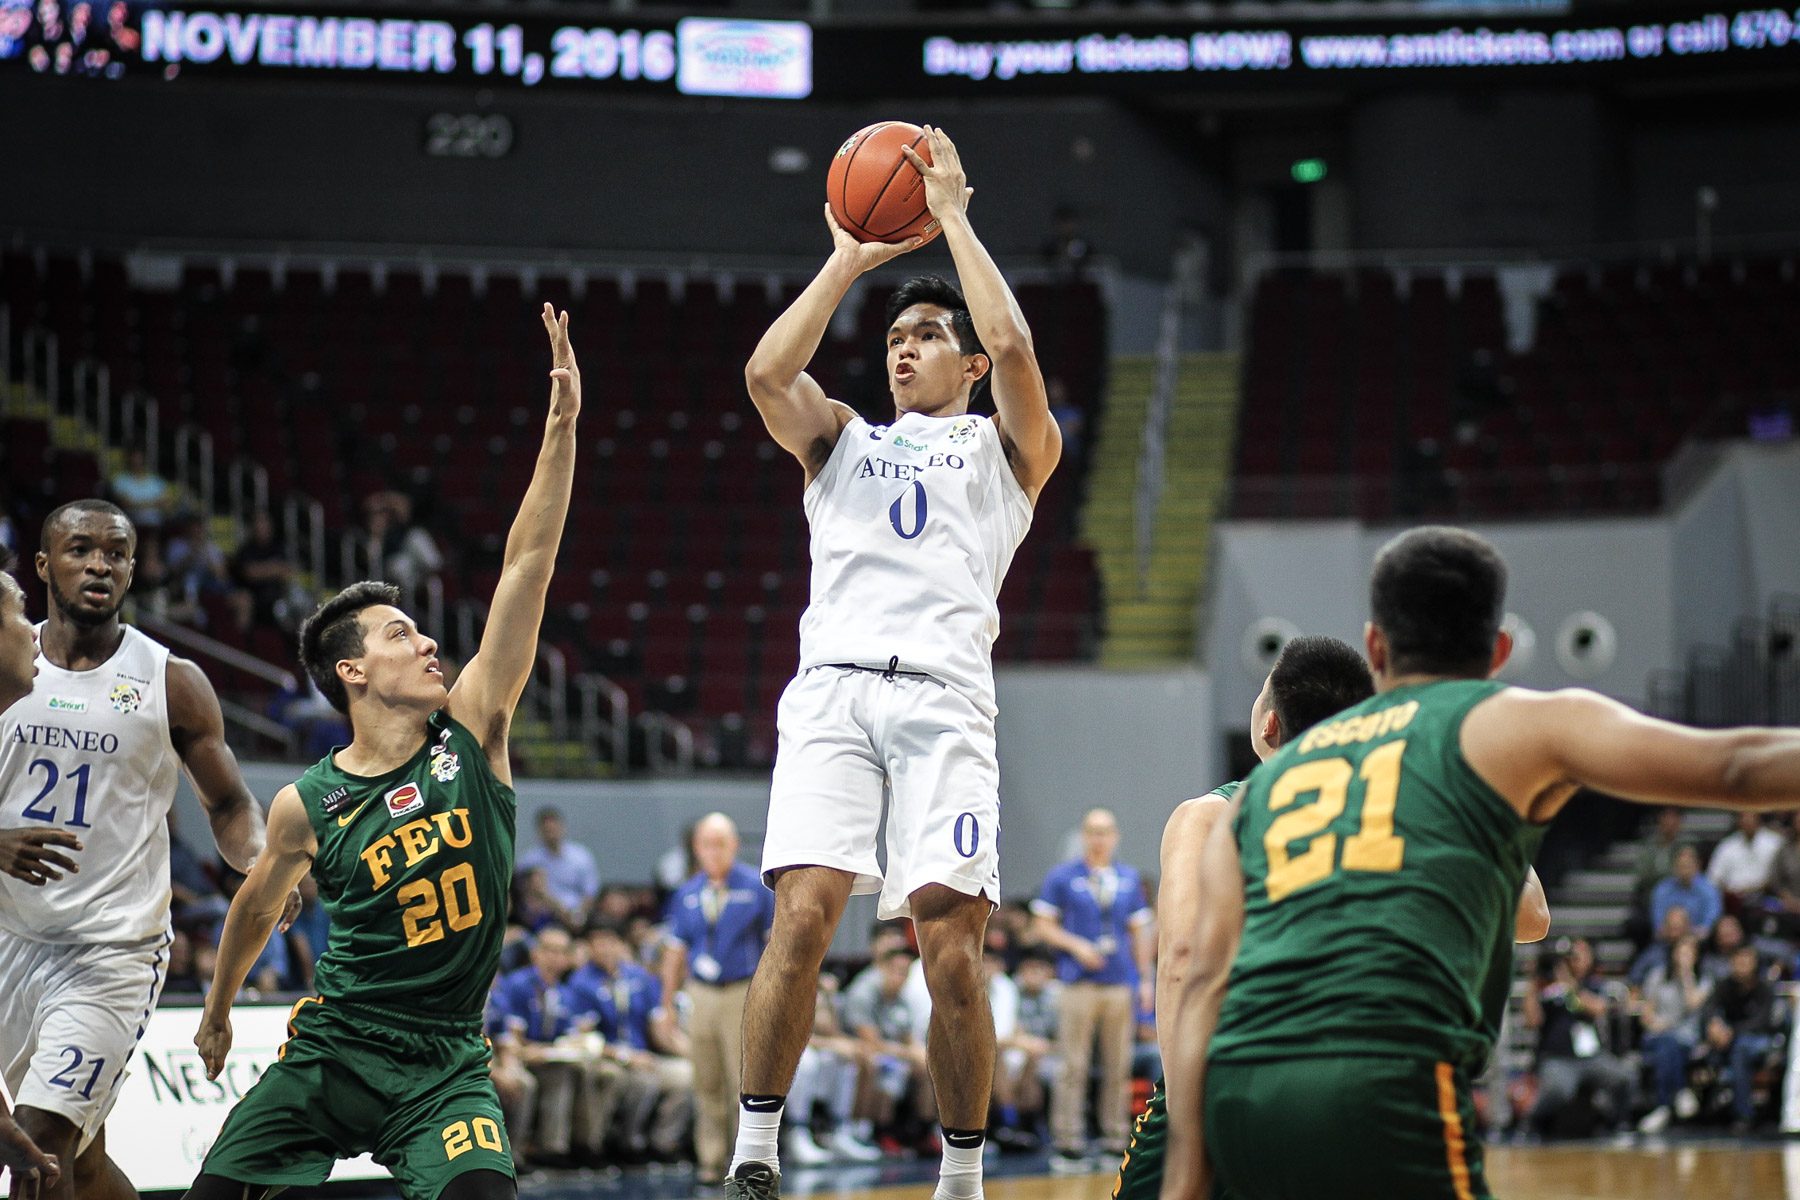 Ateneo trumps FEU to tie for second place